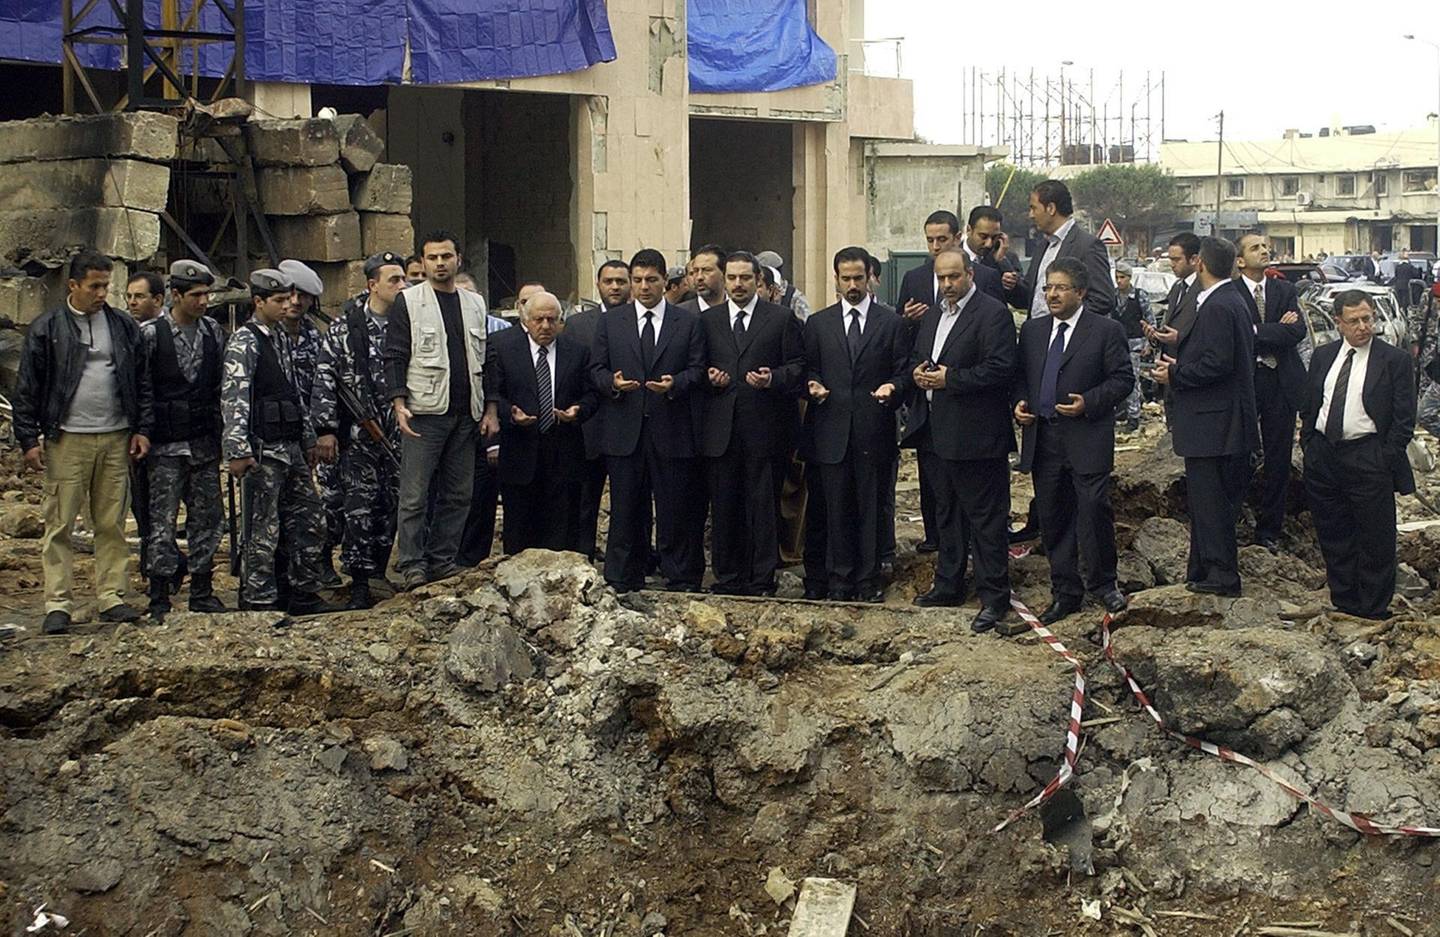 (FILES) In this file photo taken on February 19, 2005, three of the sons of slain Lebanese prime minister Rafiq Hariri Ayman, Saadeddin, and Bahaa (C) pray at the site of a massive explosion in which their father was killed along with 14 people in central Beirut. On Valentine's Day 2005, the former prime minister Rafic Hariri who embodied the reconstruction of the country after its 1975-1990 civil war was killed in a monster bomb attack on his convoy. The special tribunal trying the four suspects accused of the 2005 assassination is expected to deliver its verdict on on August 18, 2020. / AFP / -
